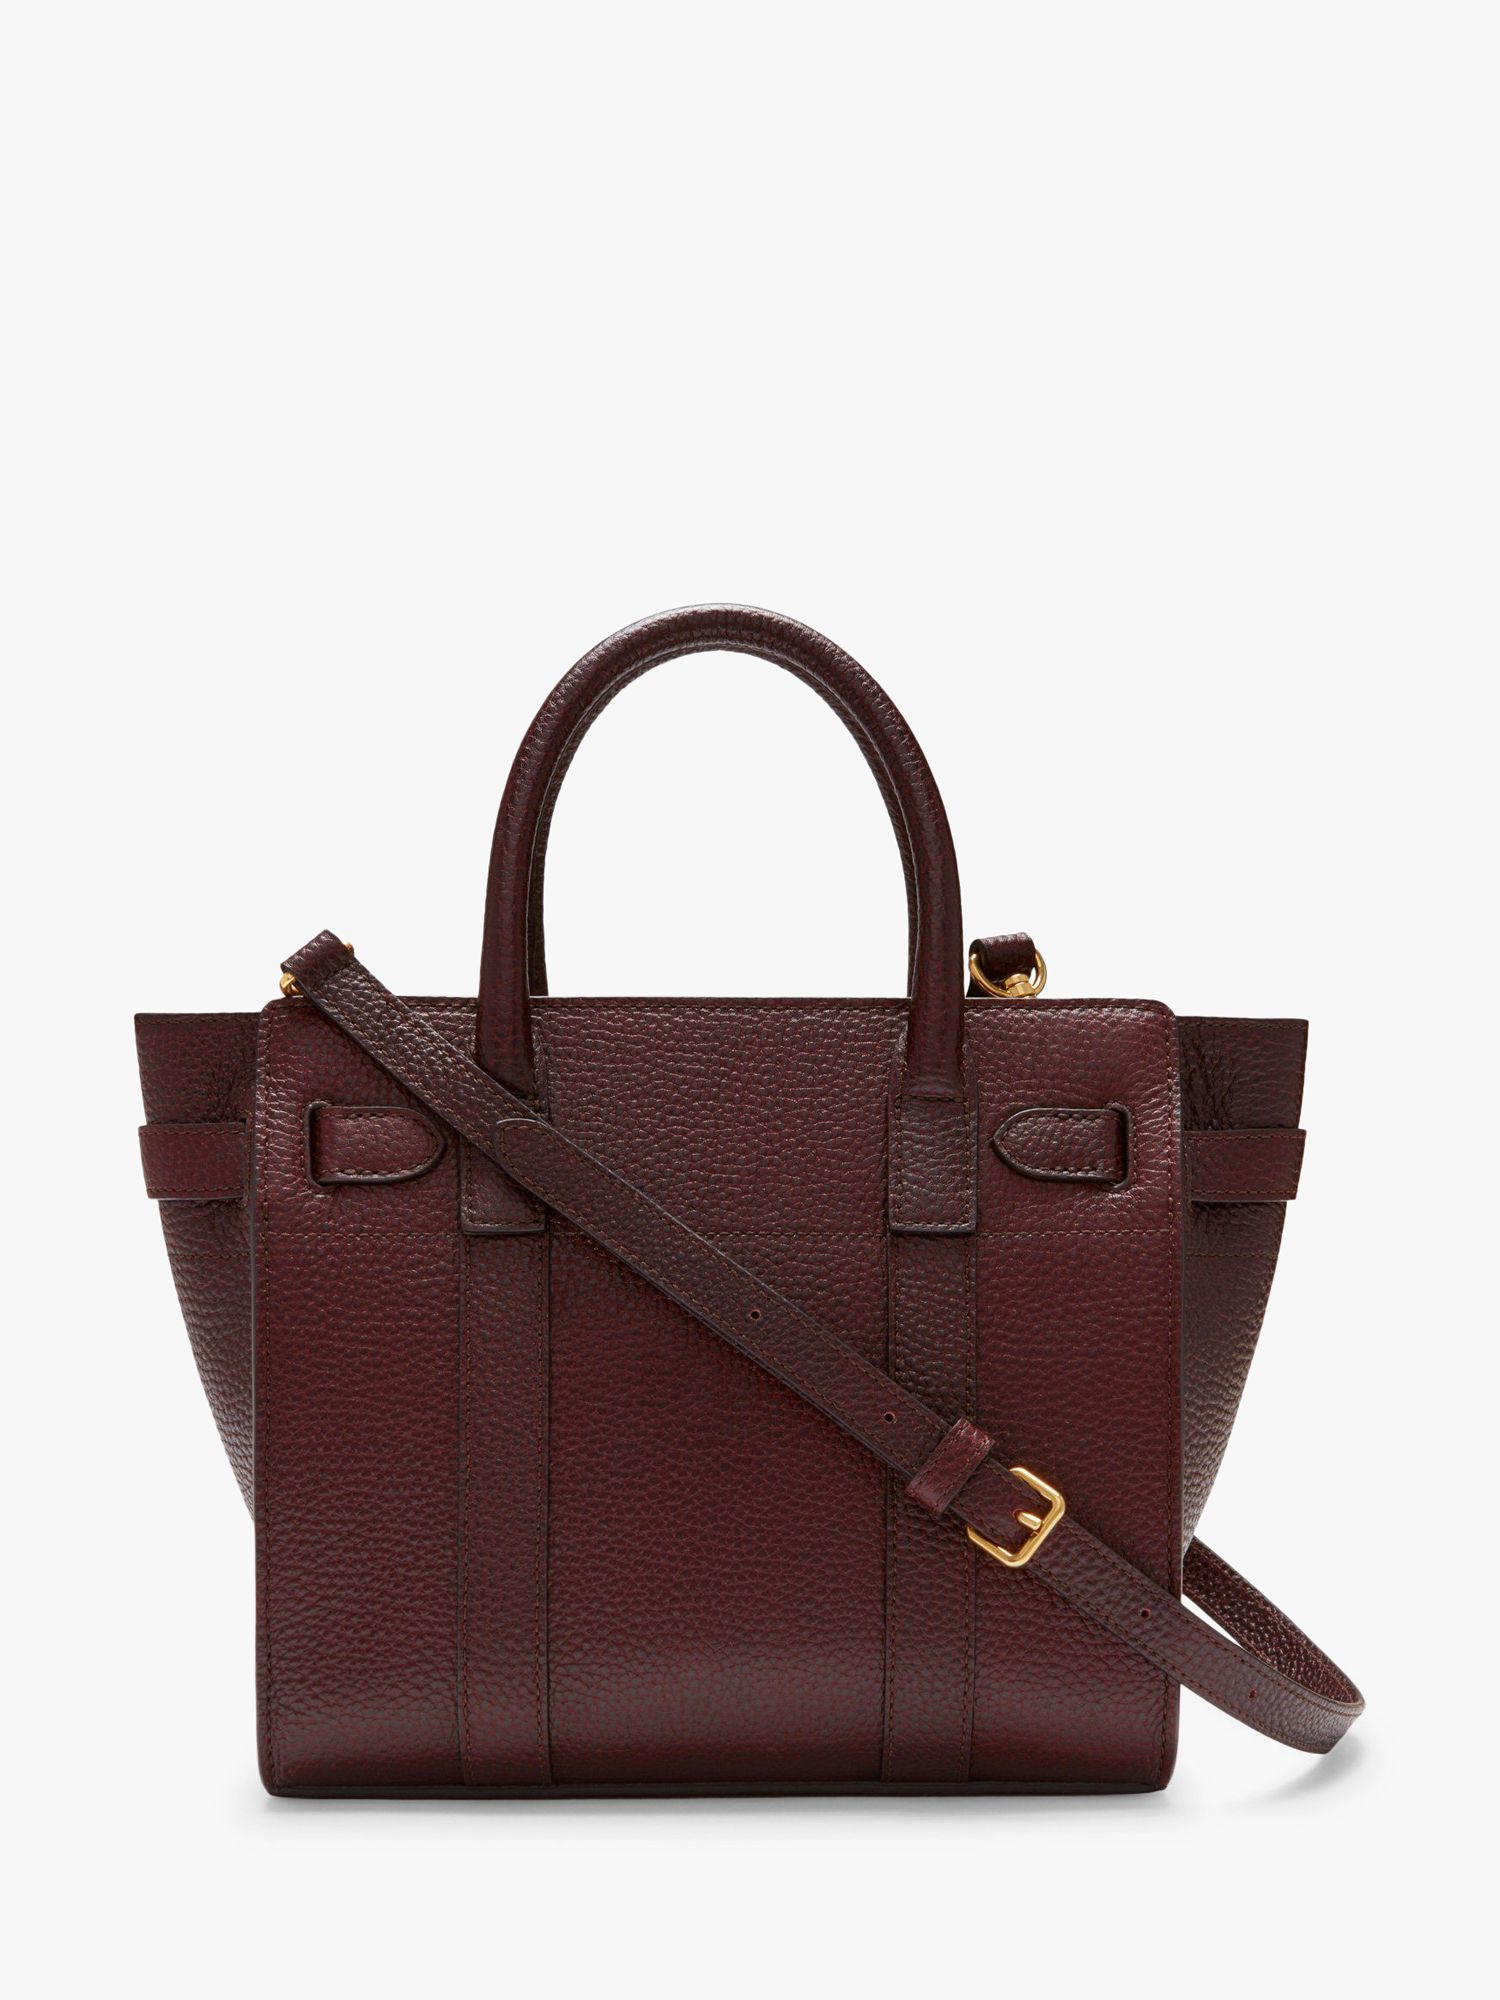 Mulberry Mini Bayswater Zipped Classic Grain Leather Tote Bag, Oxblood ...